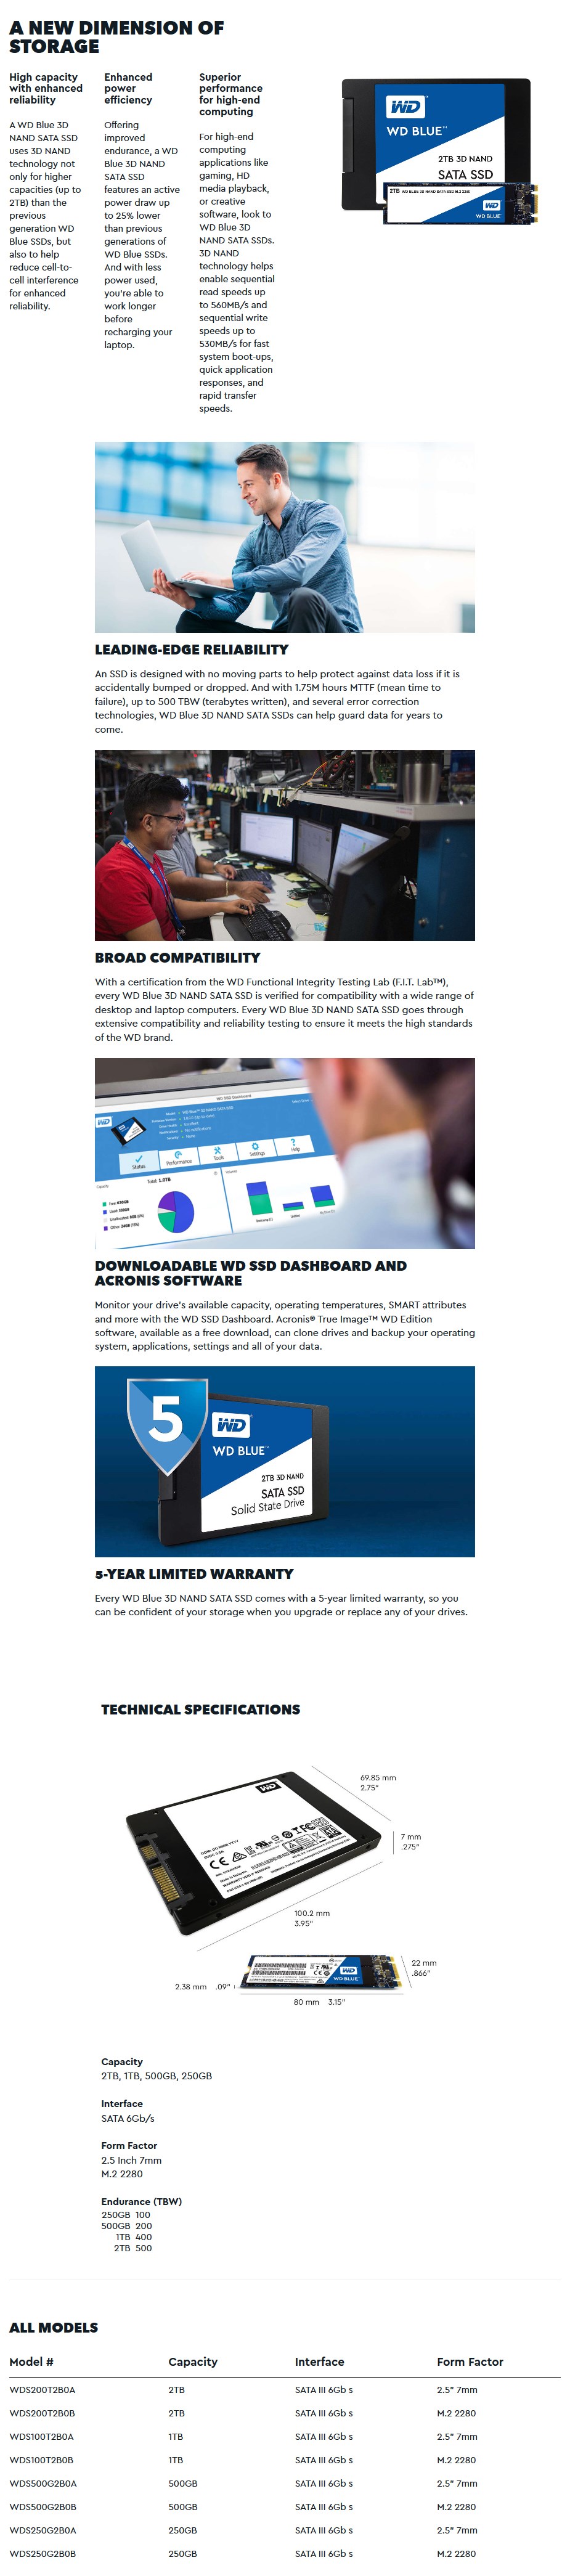 A large marketing image providing additional information about the product WD Blue SA510 SATA III 2.5" SSD - 4TB - Additional alt info not provided